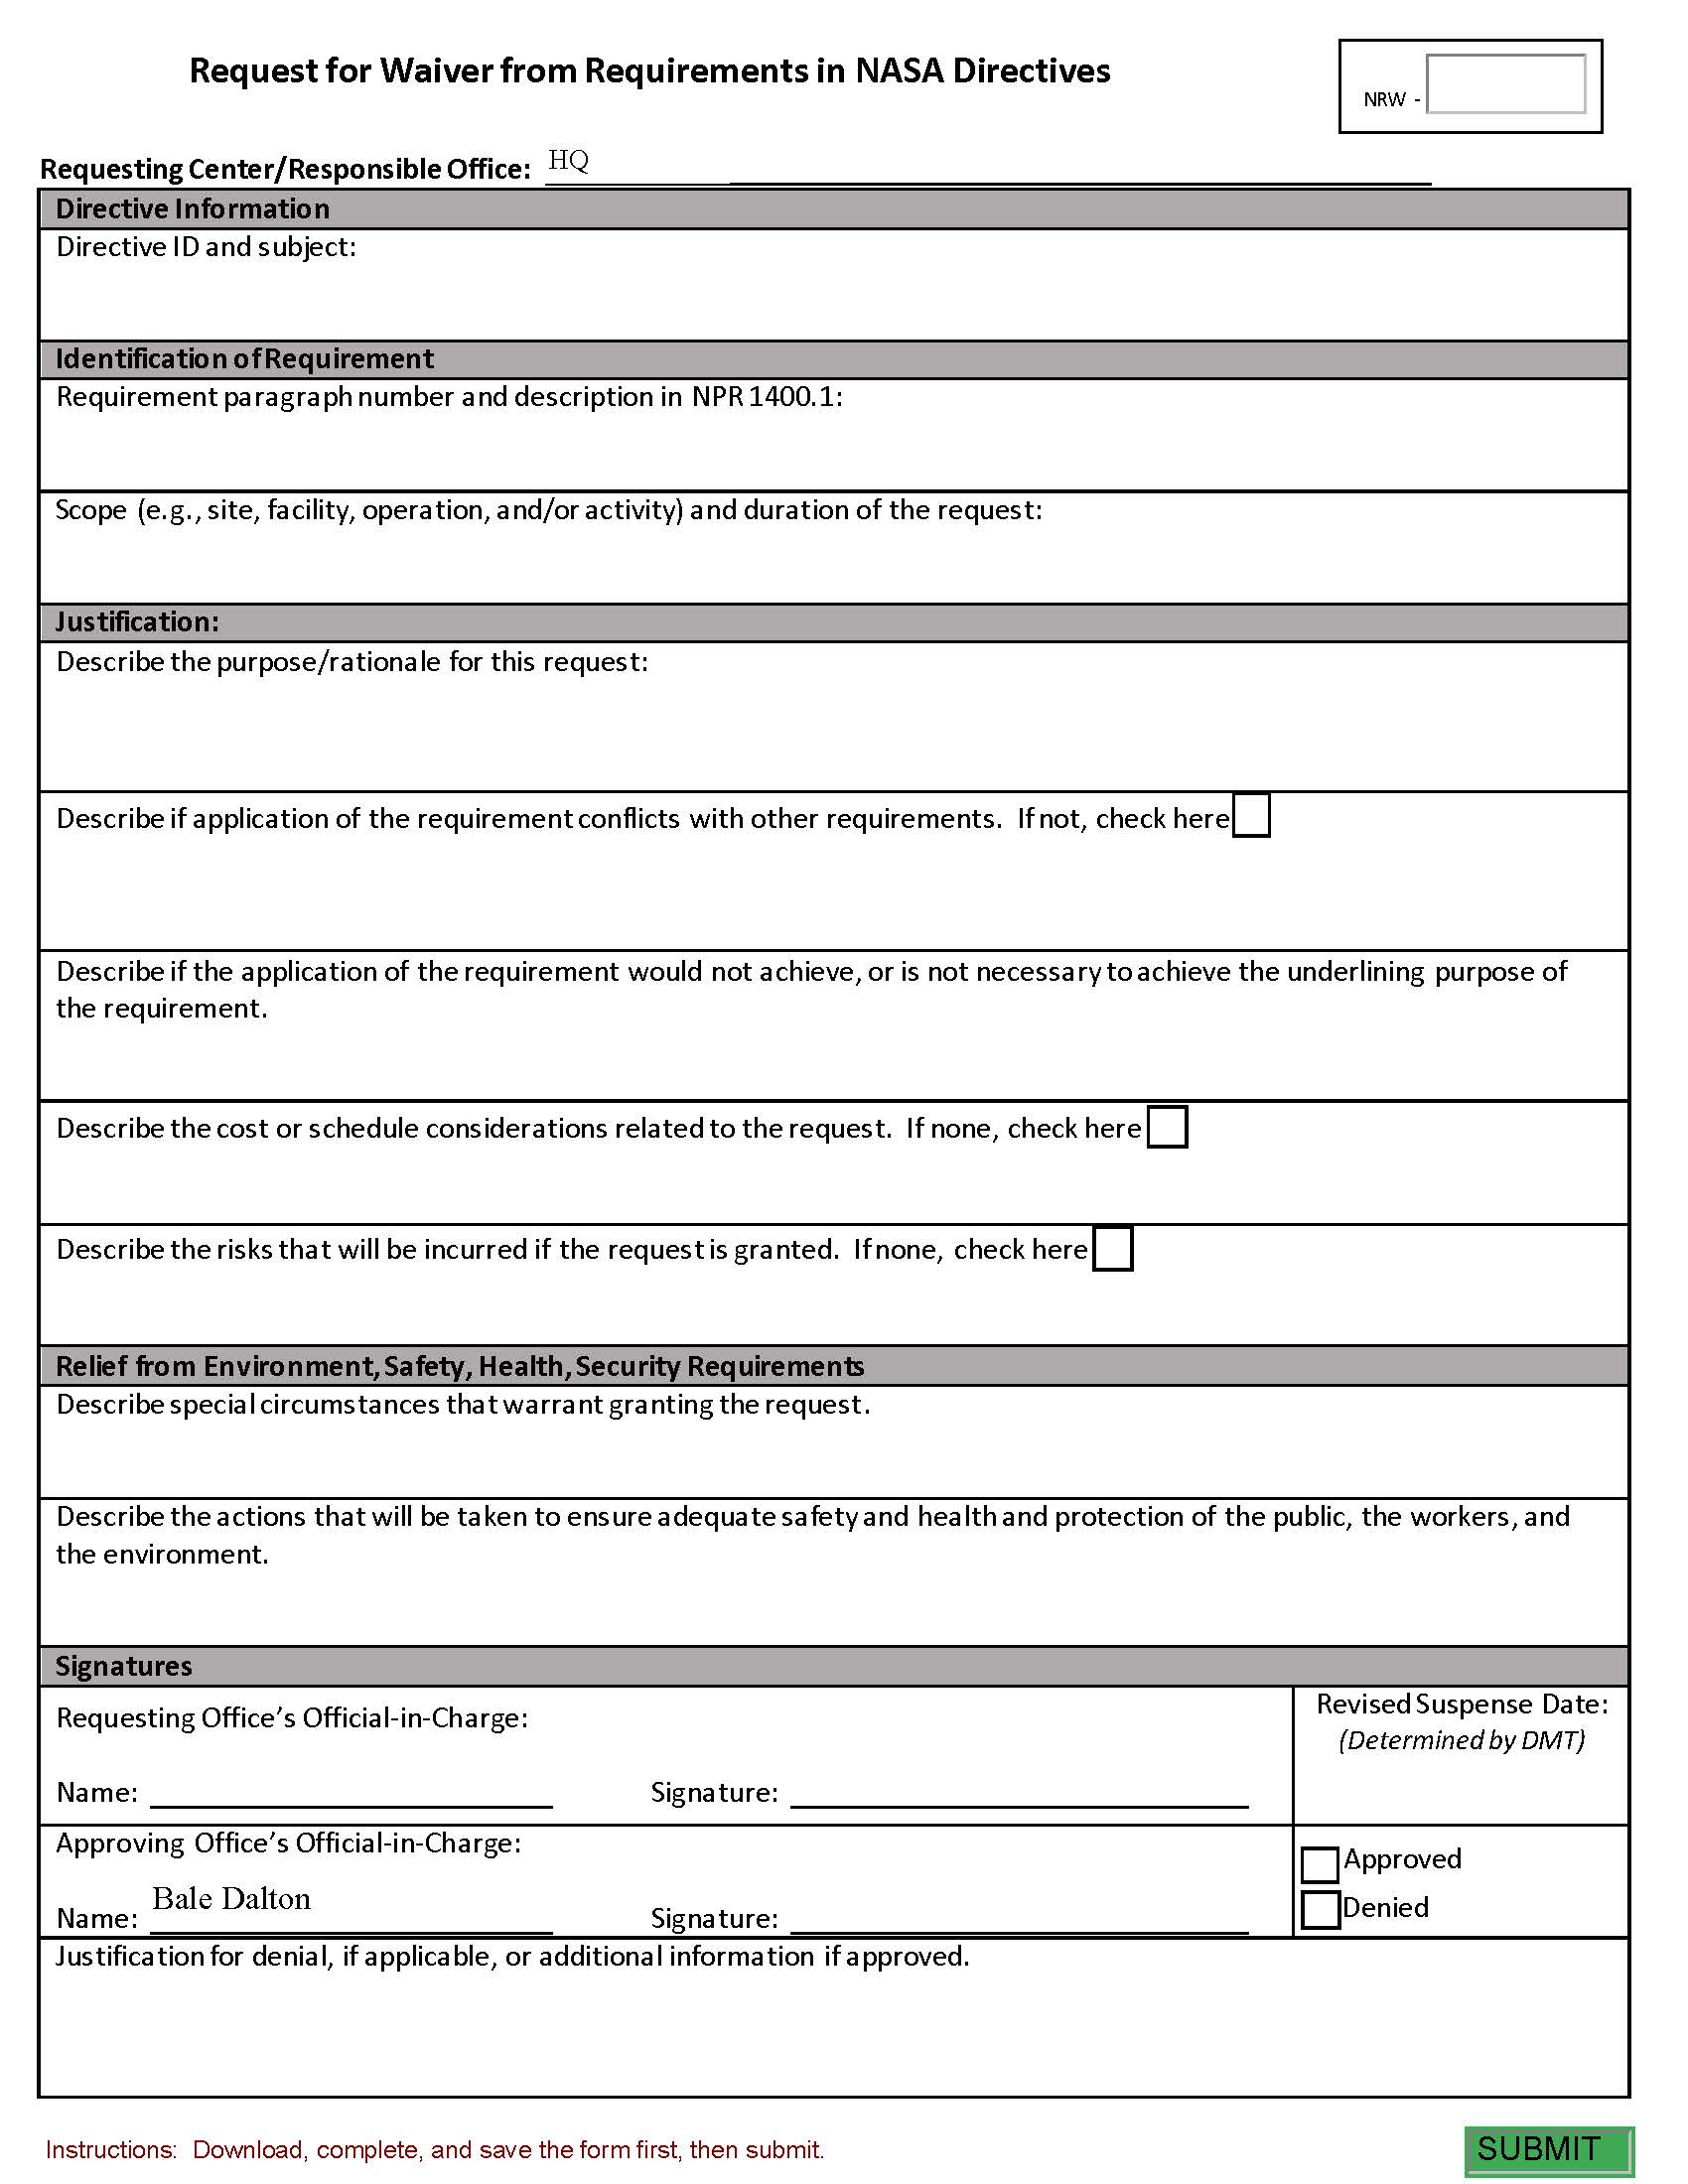 The image shows the form used for Requests for waivers from requirements in NASA Directives.